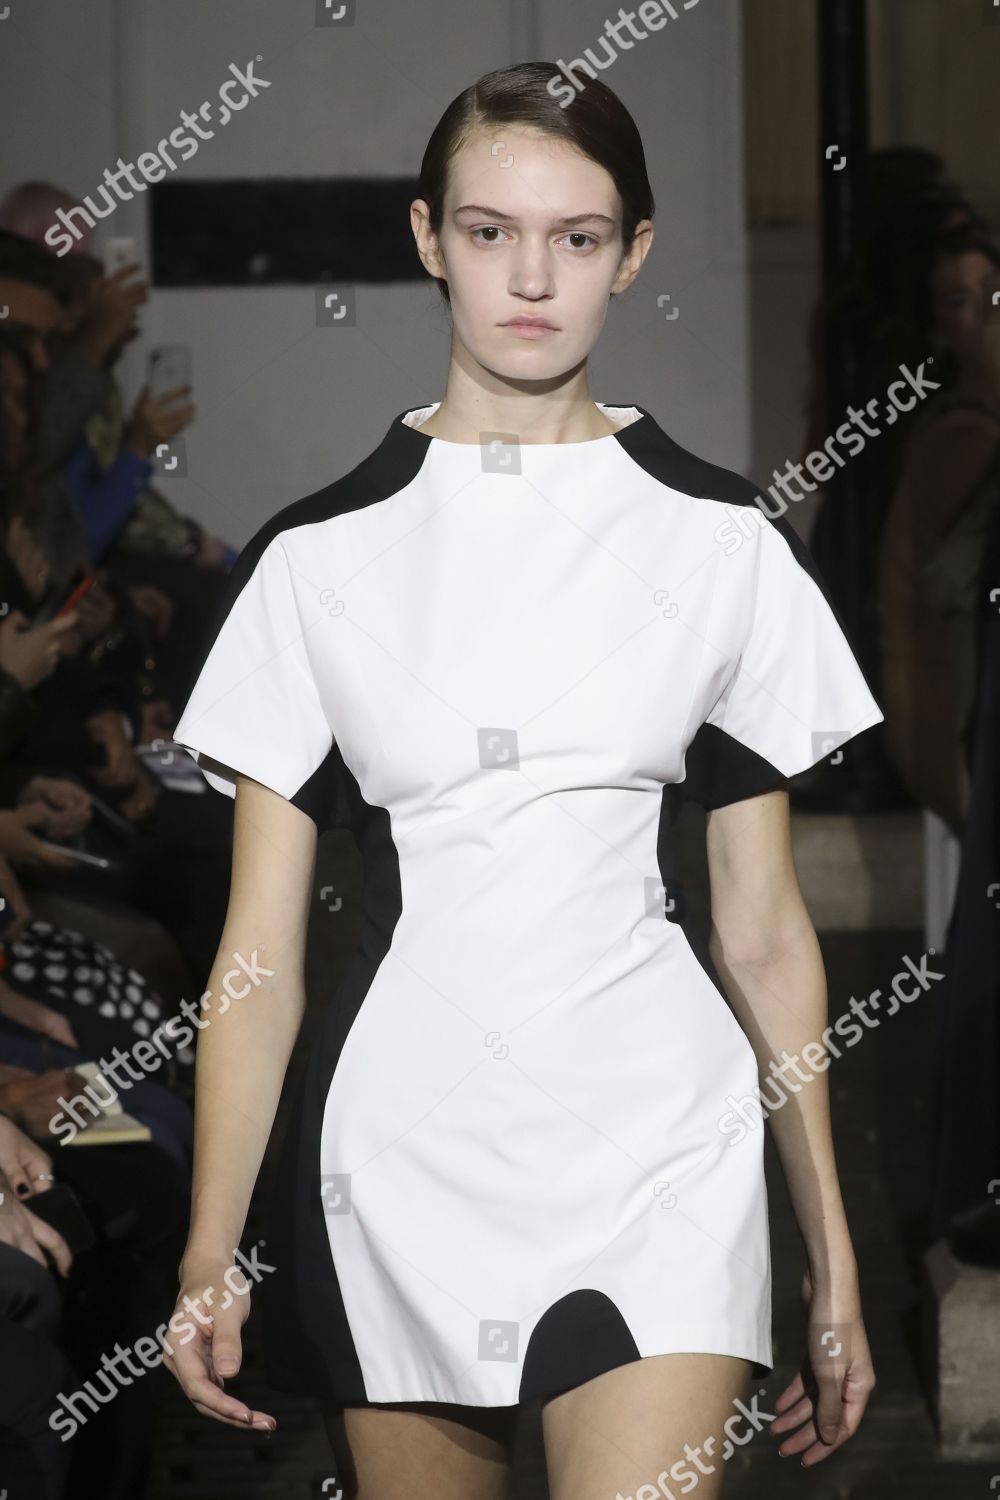 Laci Spicer On Catwalk Editorial Stock Photo - Stock Image | Shutterstock